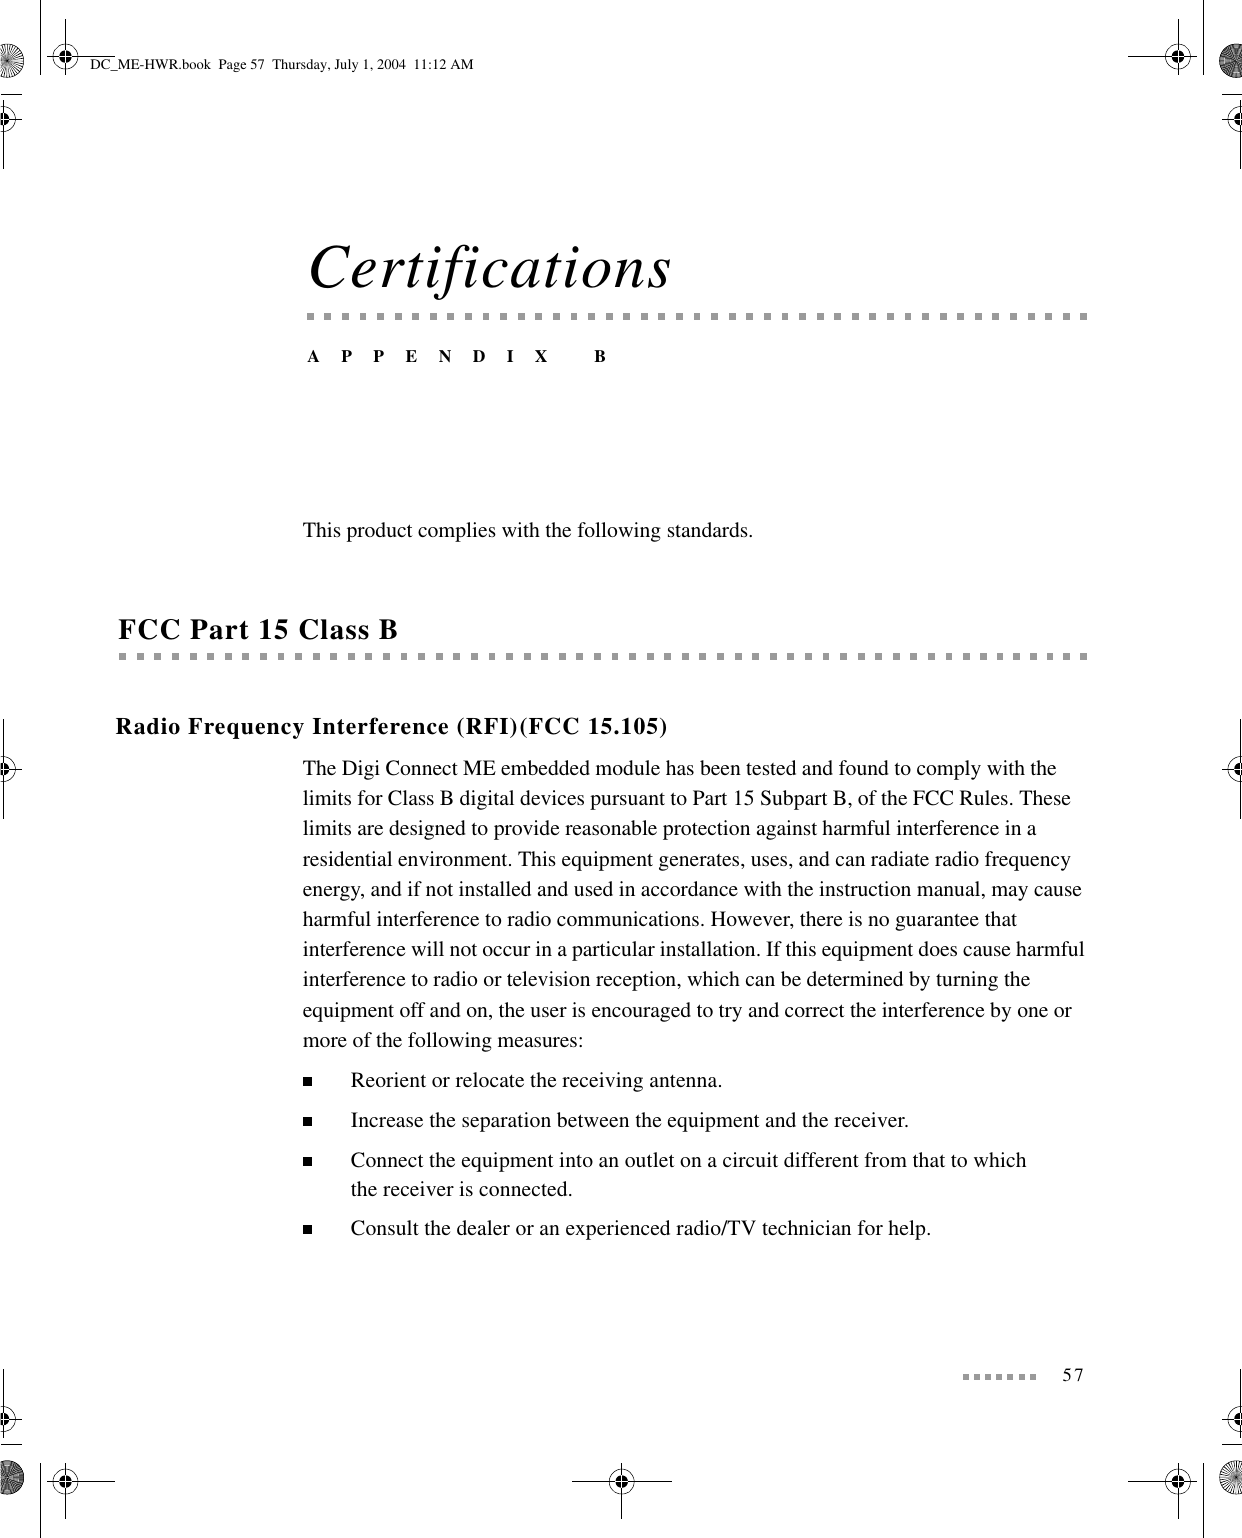 57CertificationsAPPENDIX BThis product complies with the following standards.FCC Part 15 Class BRadio Frequency Interference (RFI)(FCC 15.105)The Digi Connect ME embedded module has been tested and found to comply with the limits for Class B digital devices pursuant to Part 15 Subpart B, of the FCC Rules. These limits are designed to provide reasonable protection against harmful interference in a residential environment. This equipment generates, uses, and can radiate radio frequency energy, and if not installed and used in accordance with the instruction manual, may cause harmful interference to radio communications. However, there is no guarantee that interference will not occur in a particular installation. If this equipment does cause harmful interference to radio or television reception, which can be determined by turning the equipment off and on, the user is encouraged to try and correct the interference by one or more of the following measures:Reorient or relocate the receiving antenna.Increase the separation between the equipment and the receiver.Connect the equipment into an outlet on a circuit different from that to which the receiver is connected.Consult the dealer or an experienced radio/TV technician for help.DC_ME-HWR.book  Page 57  Thursday, July 1, 2004  11:12 AM